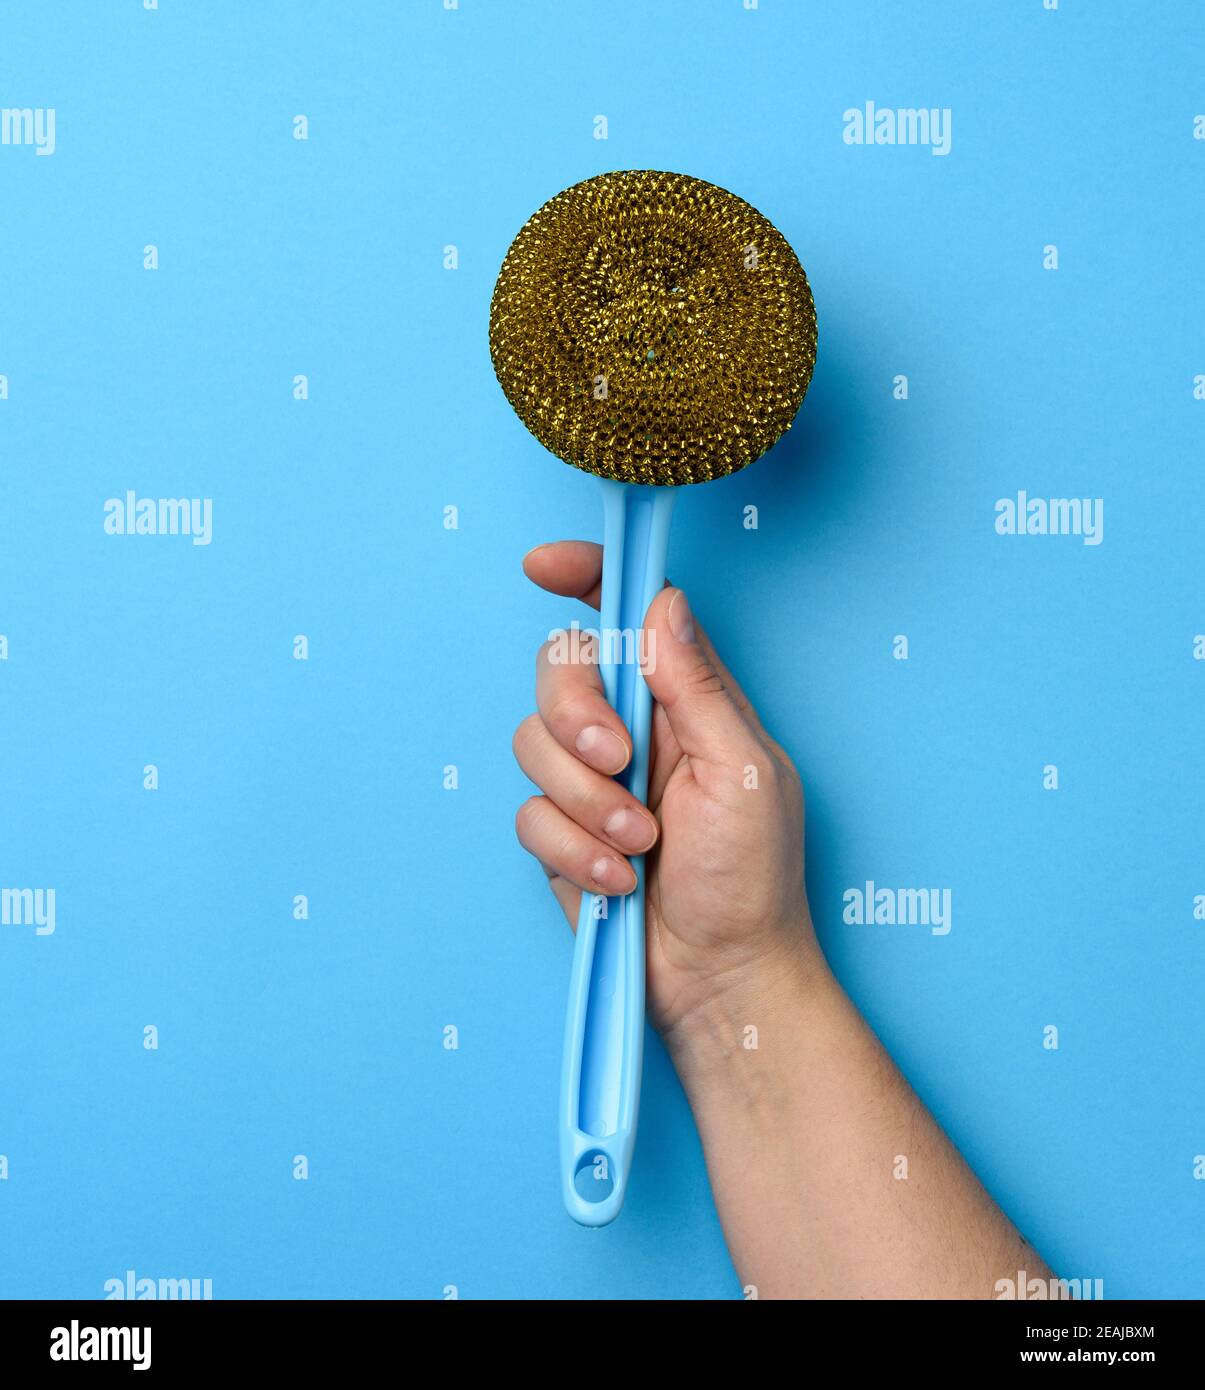 female hand holds plastic brush with a handle on a blue background Stock Photo